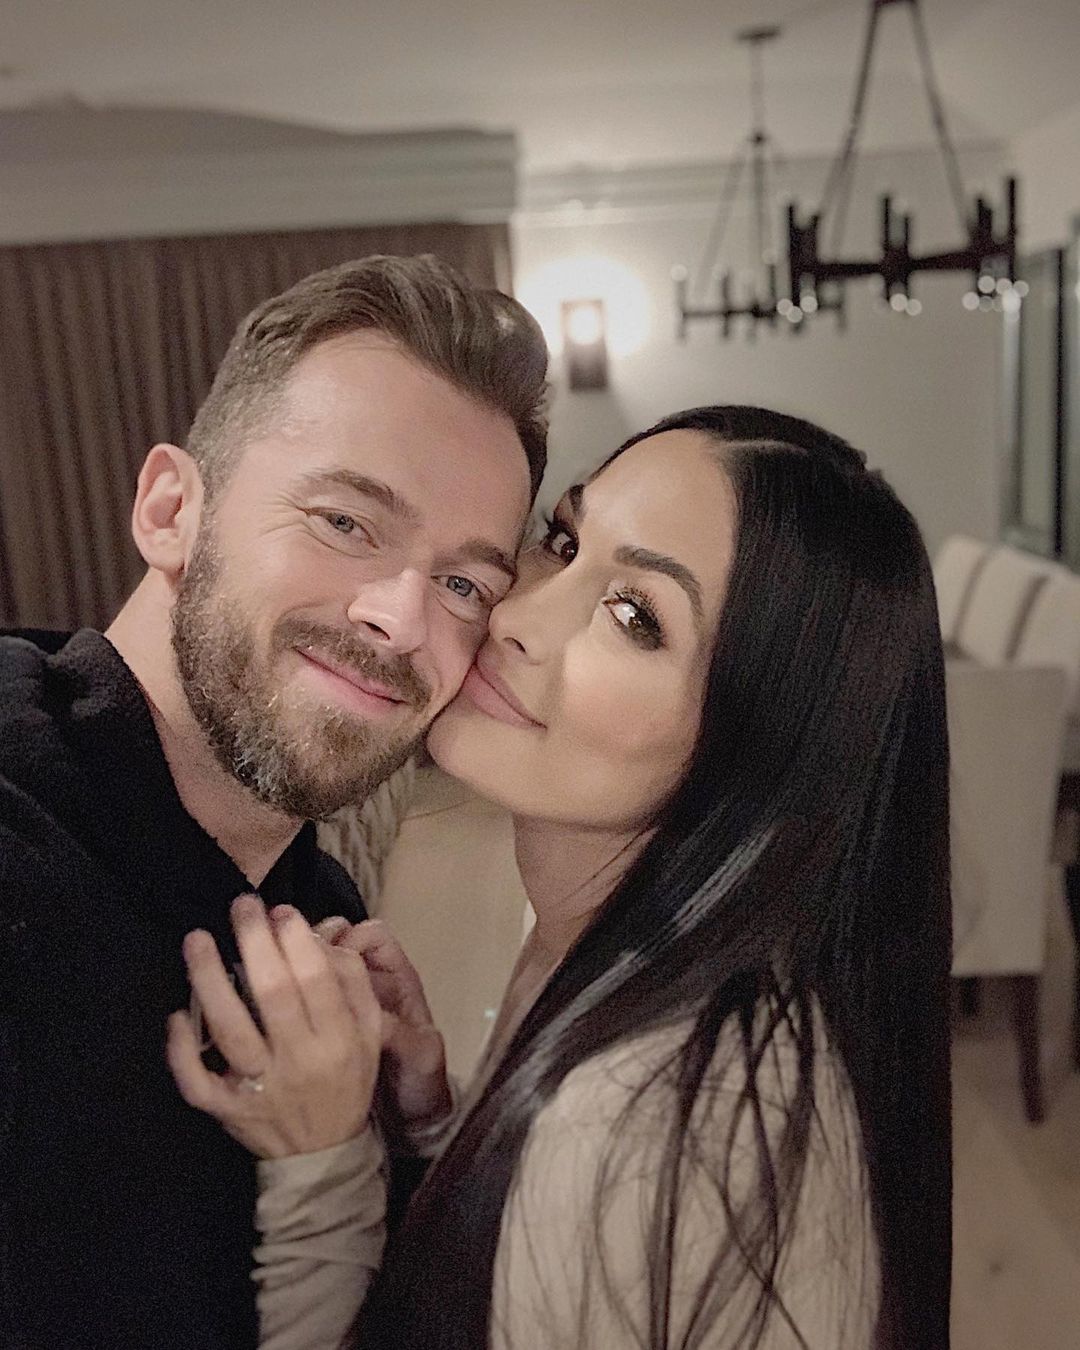 therealnikkibella and Artem Chigvintsev had their son, Matteo, as